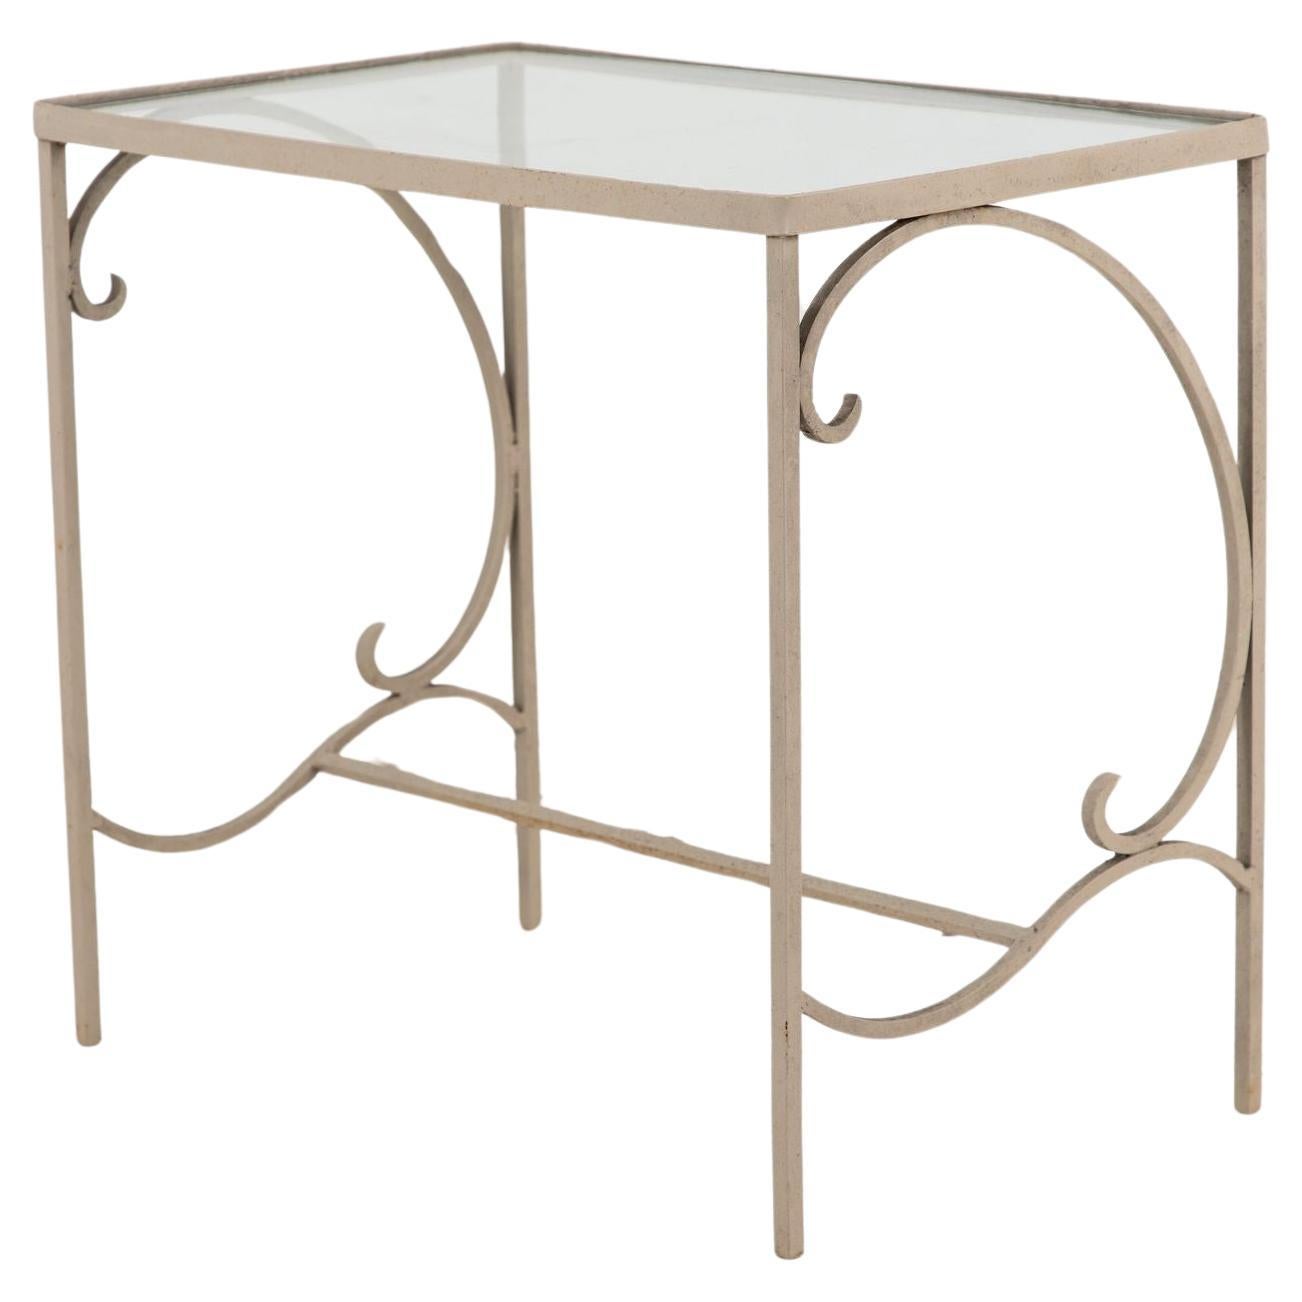 Gray Painted Metal Outdoor Garden Side Table, 1990s For Sale